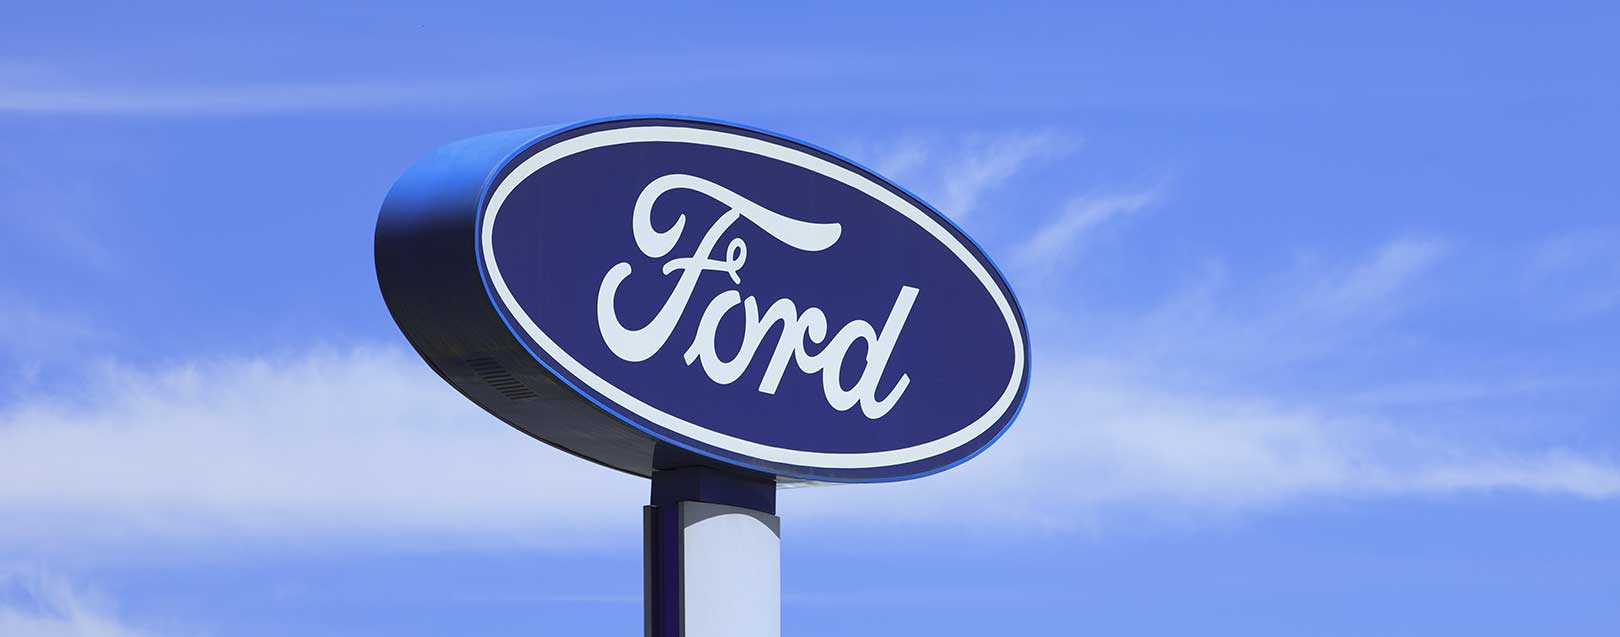 Ford to invest $1 bn in AI start-up to create autonomous vehicle